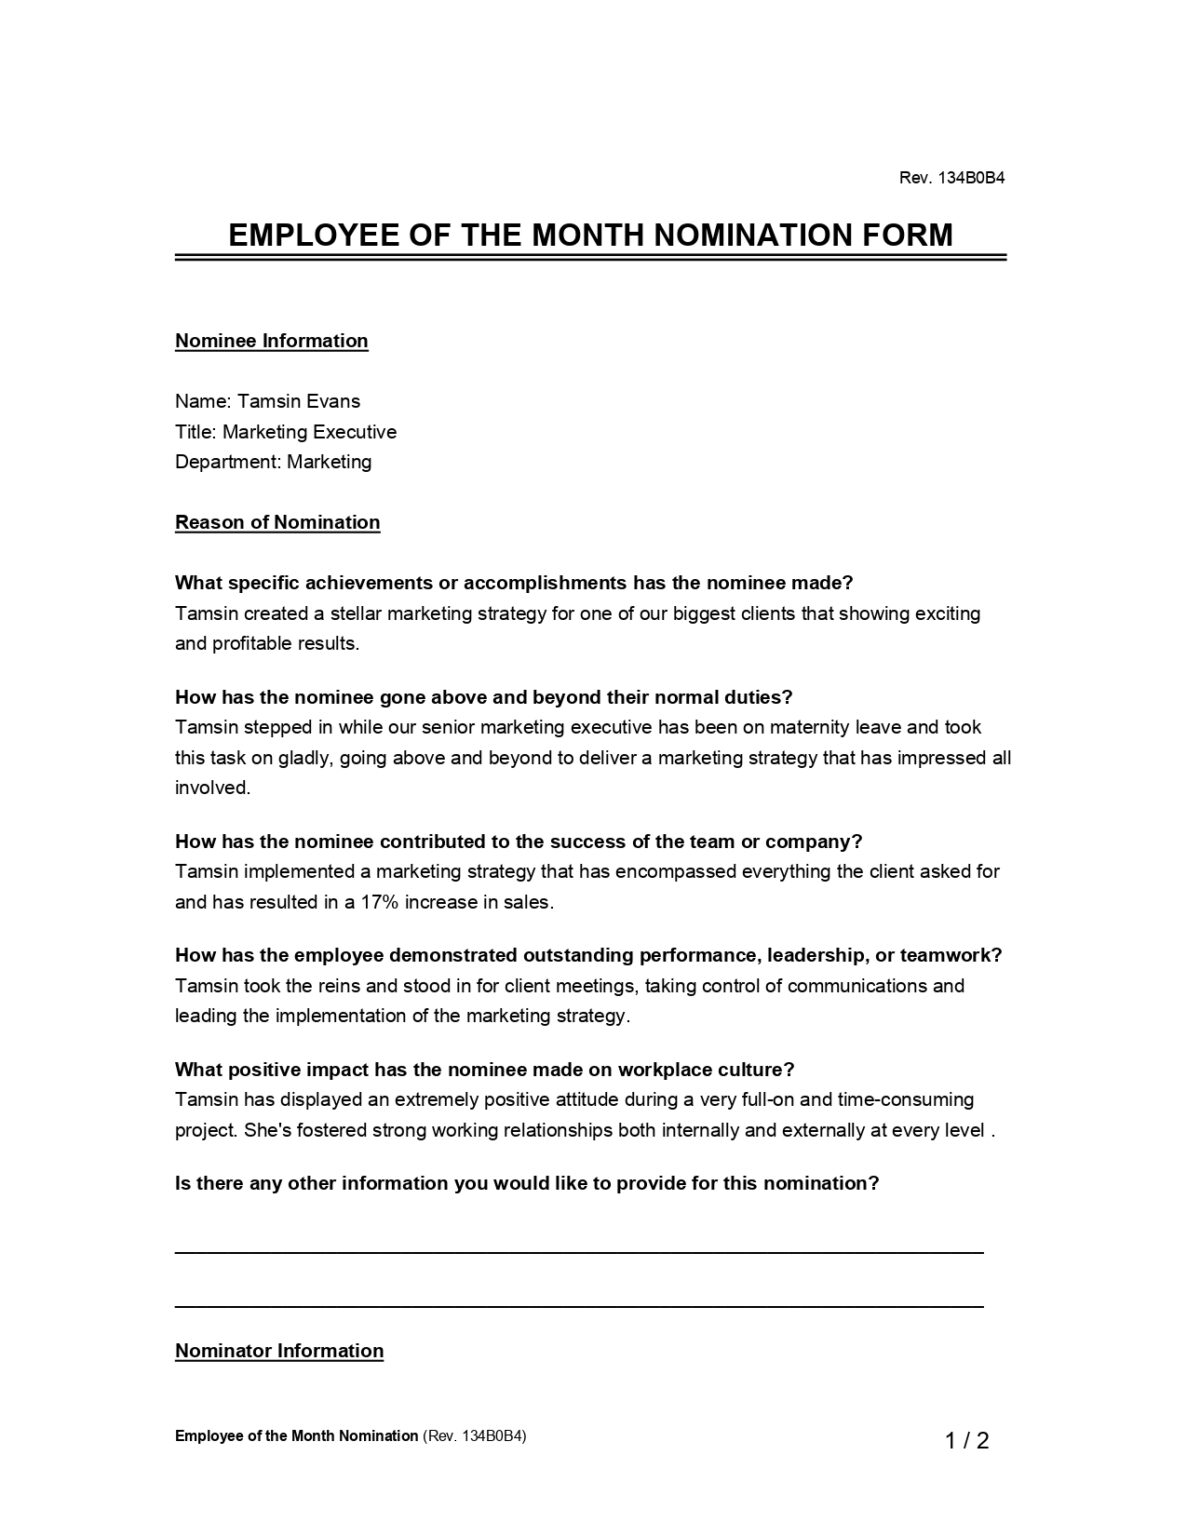 Employee of the Month Nomination Form Template PDF Word